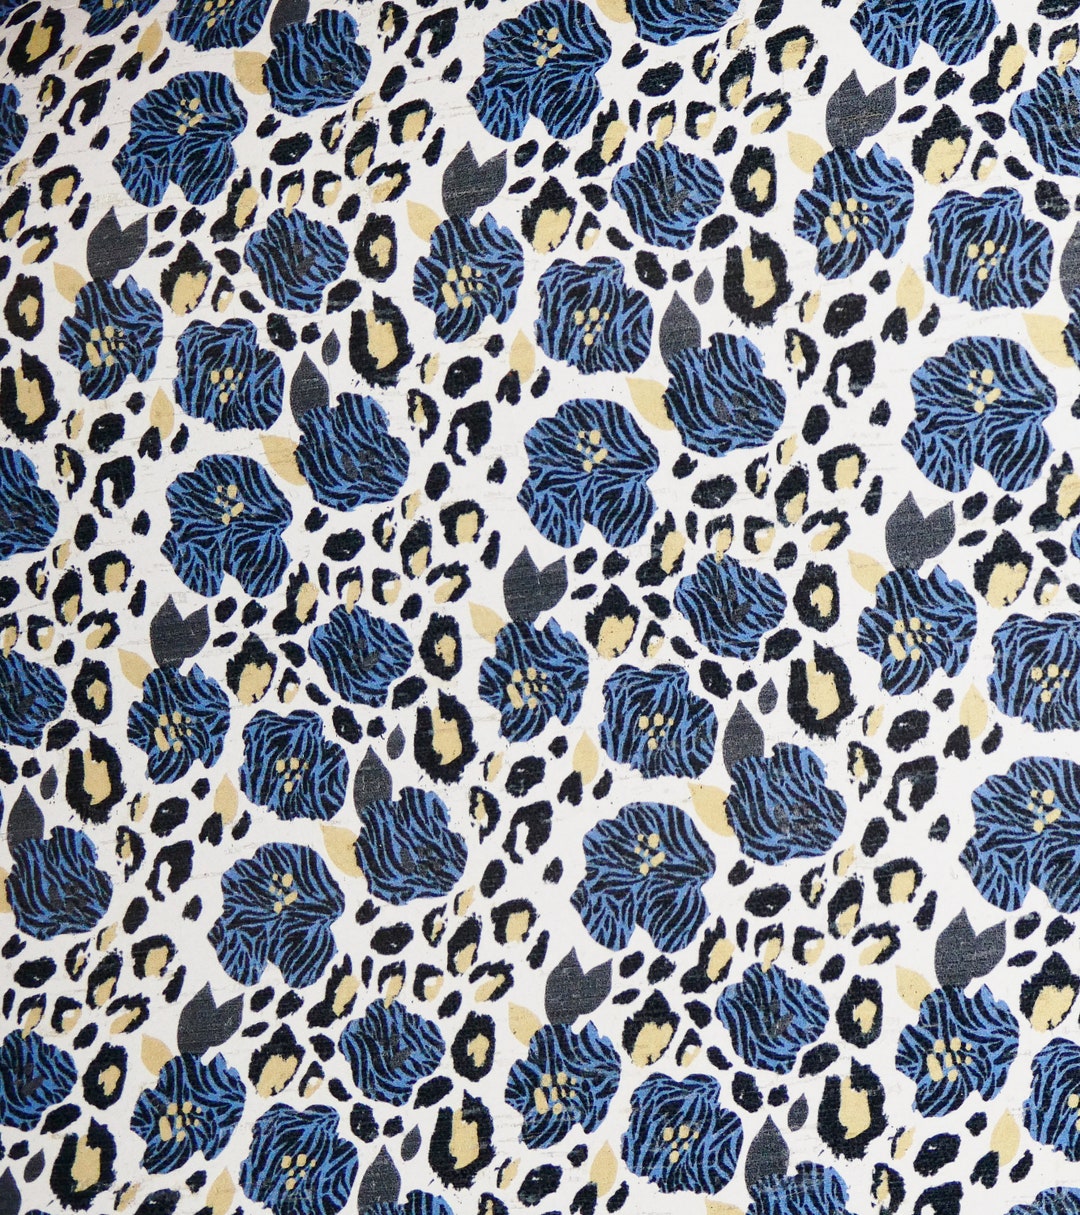 Cork 3-4-5 or 6 Sq Ft BLUE ZEBRA Floral Mixed With LEOPARD on - Etsy